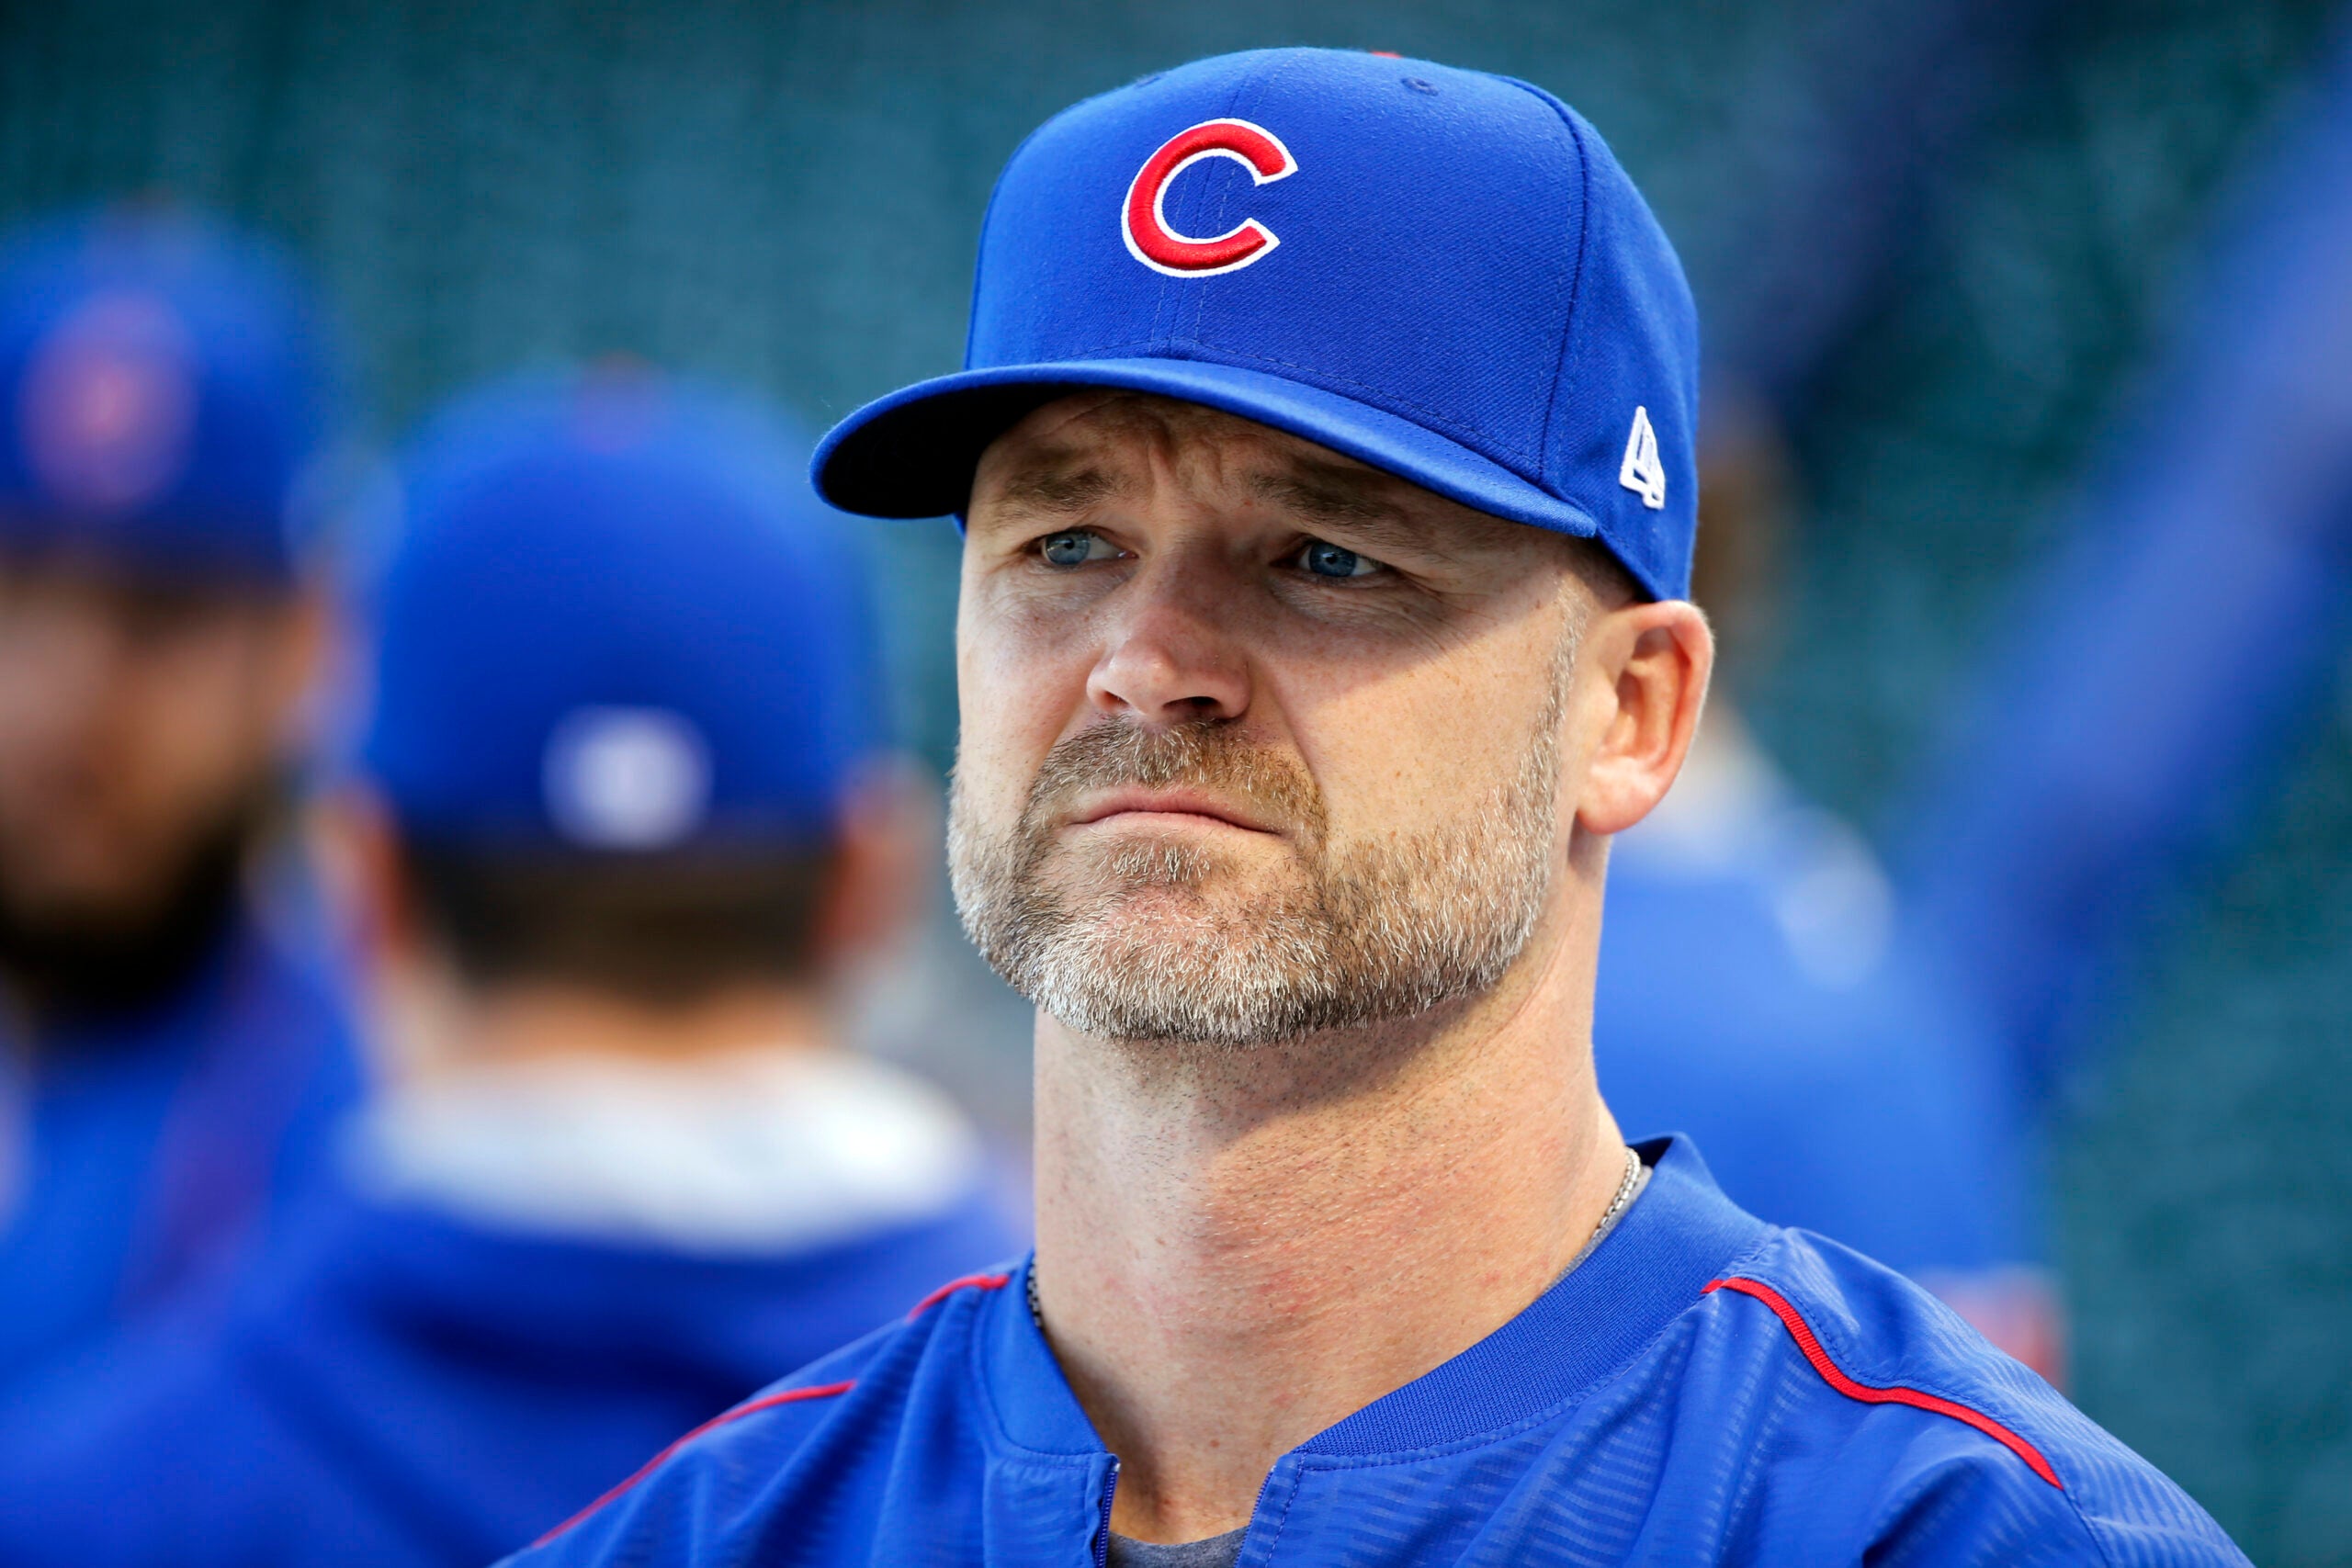 See David Ross homer for the Chicago Cubs in Game 7 of the World Series 